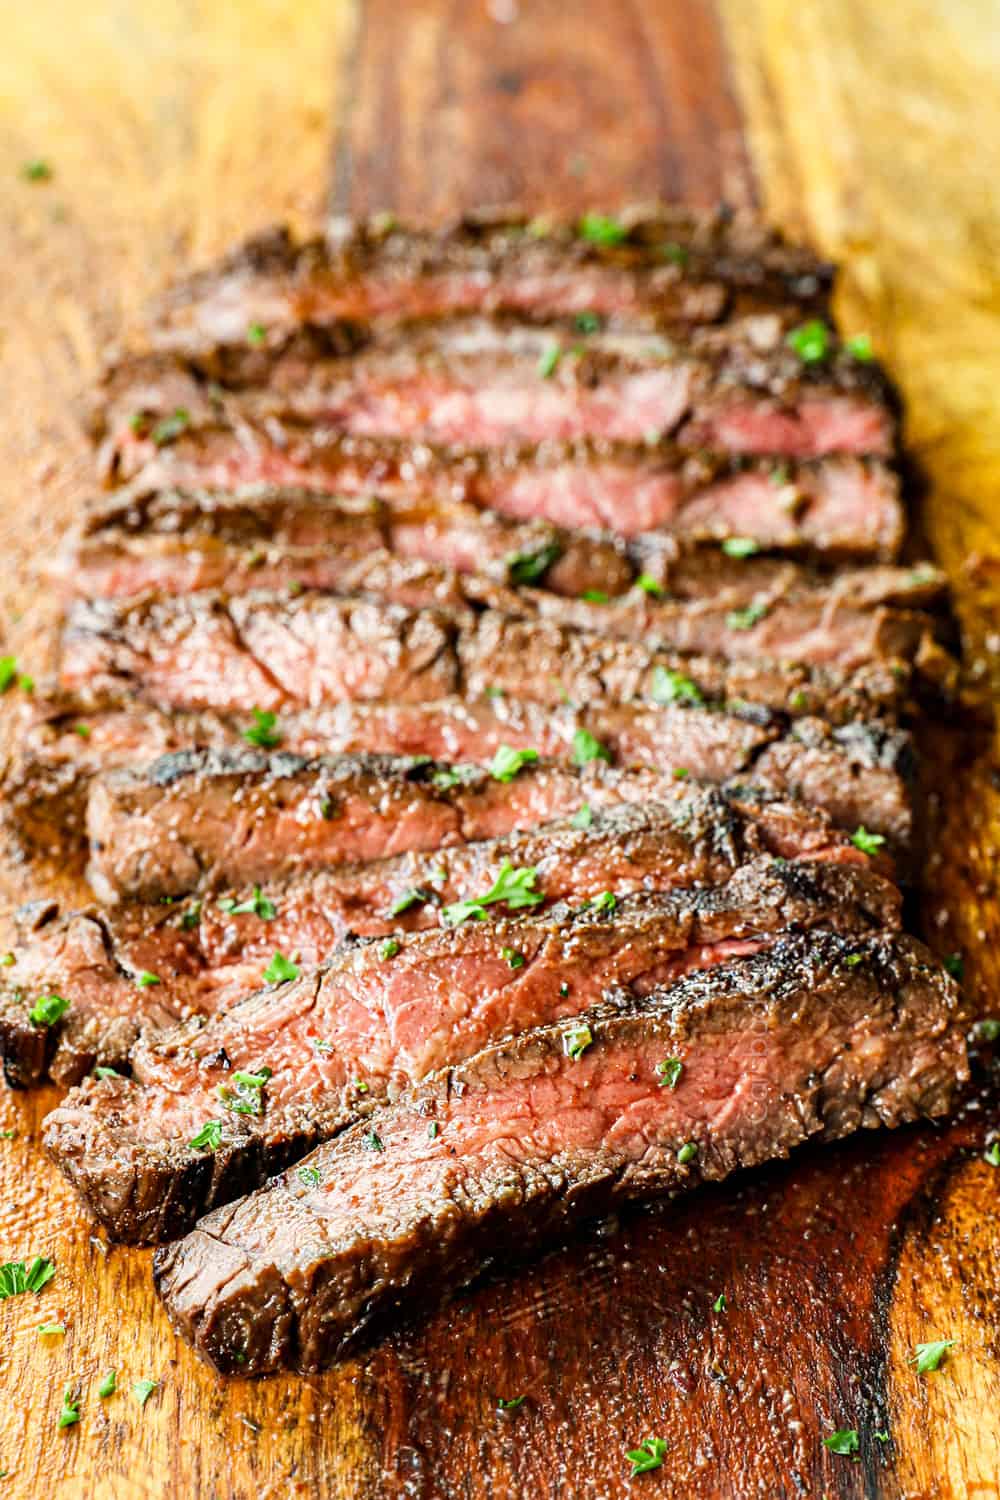 skirt steak recipe marinated and grilled, then sliced across the grain on a cutting board